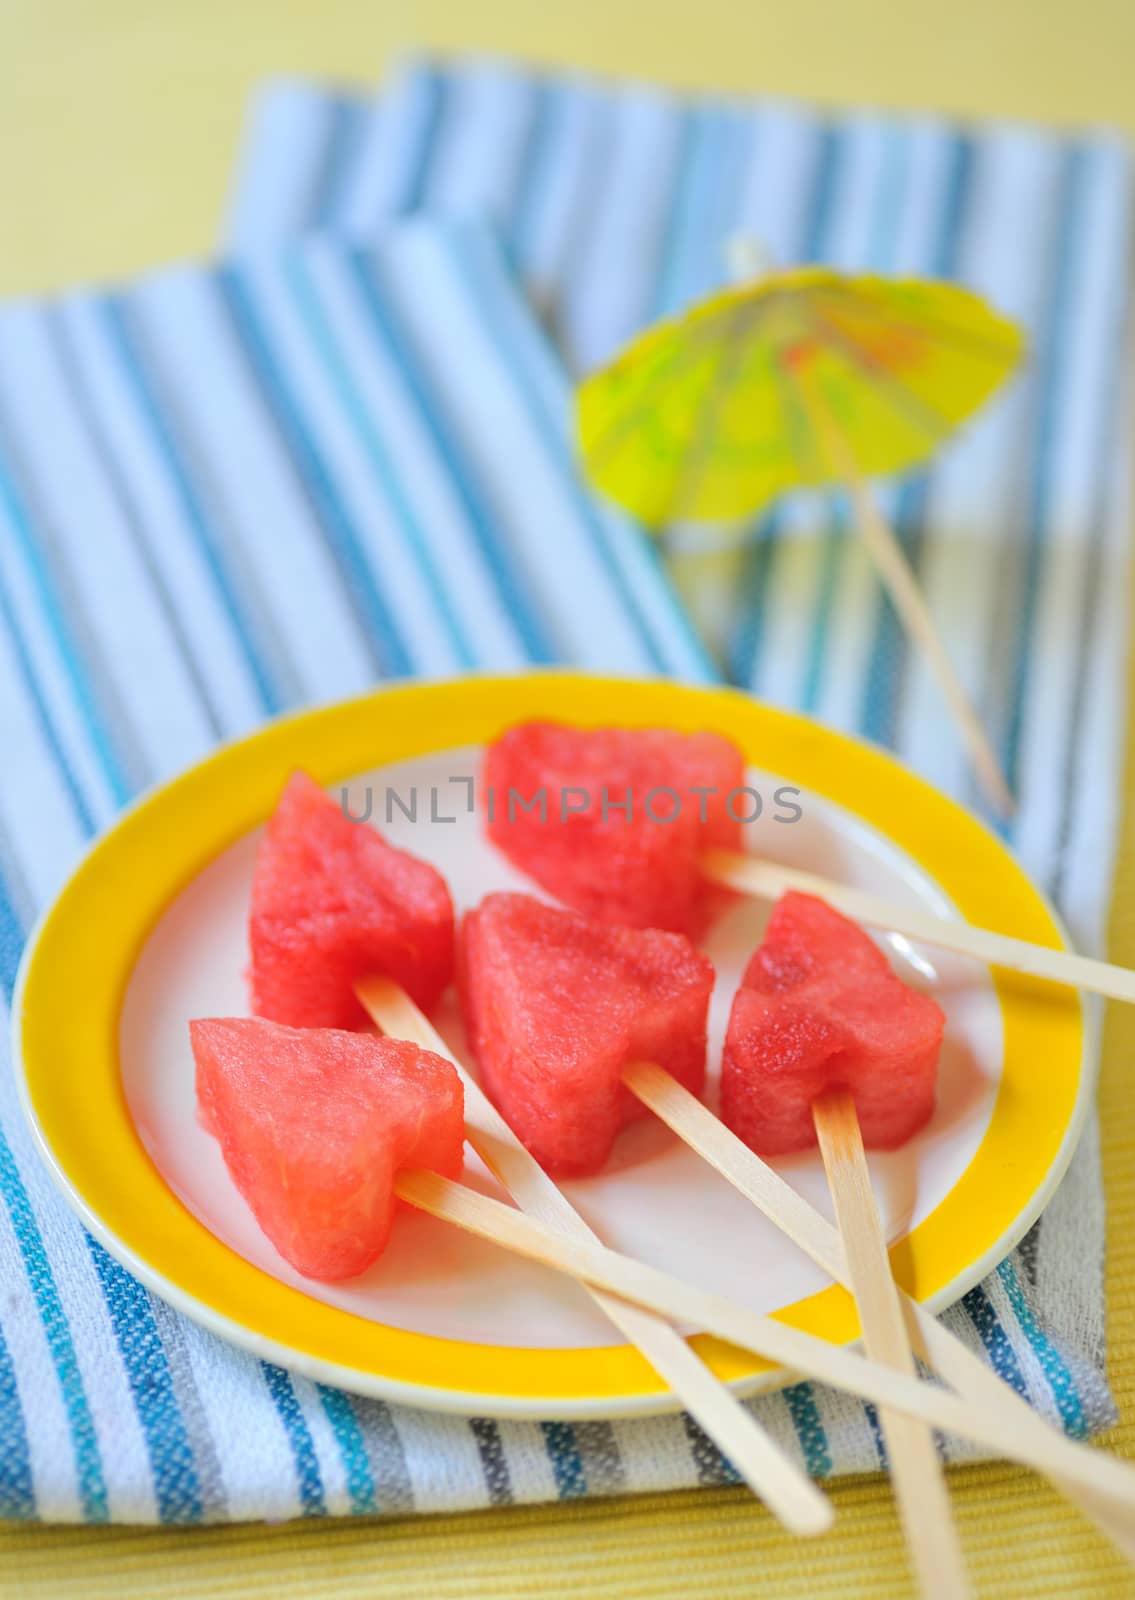 Piece of watermelon hearts shapes on plate